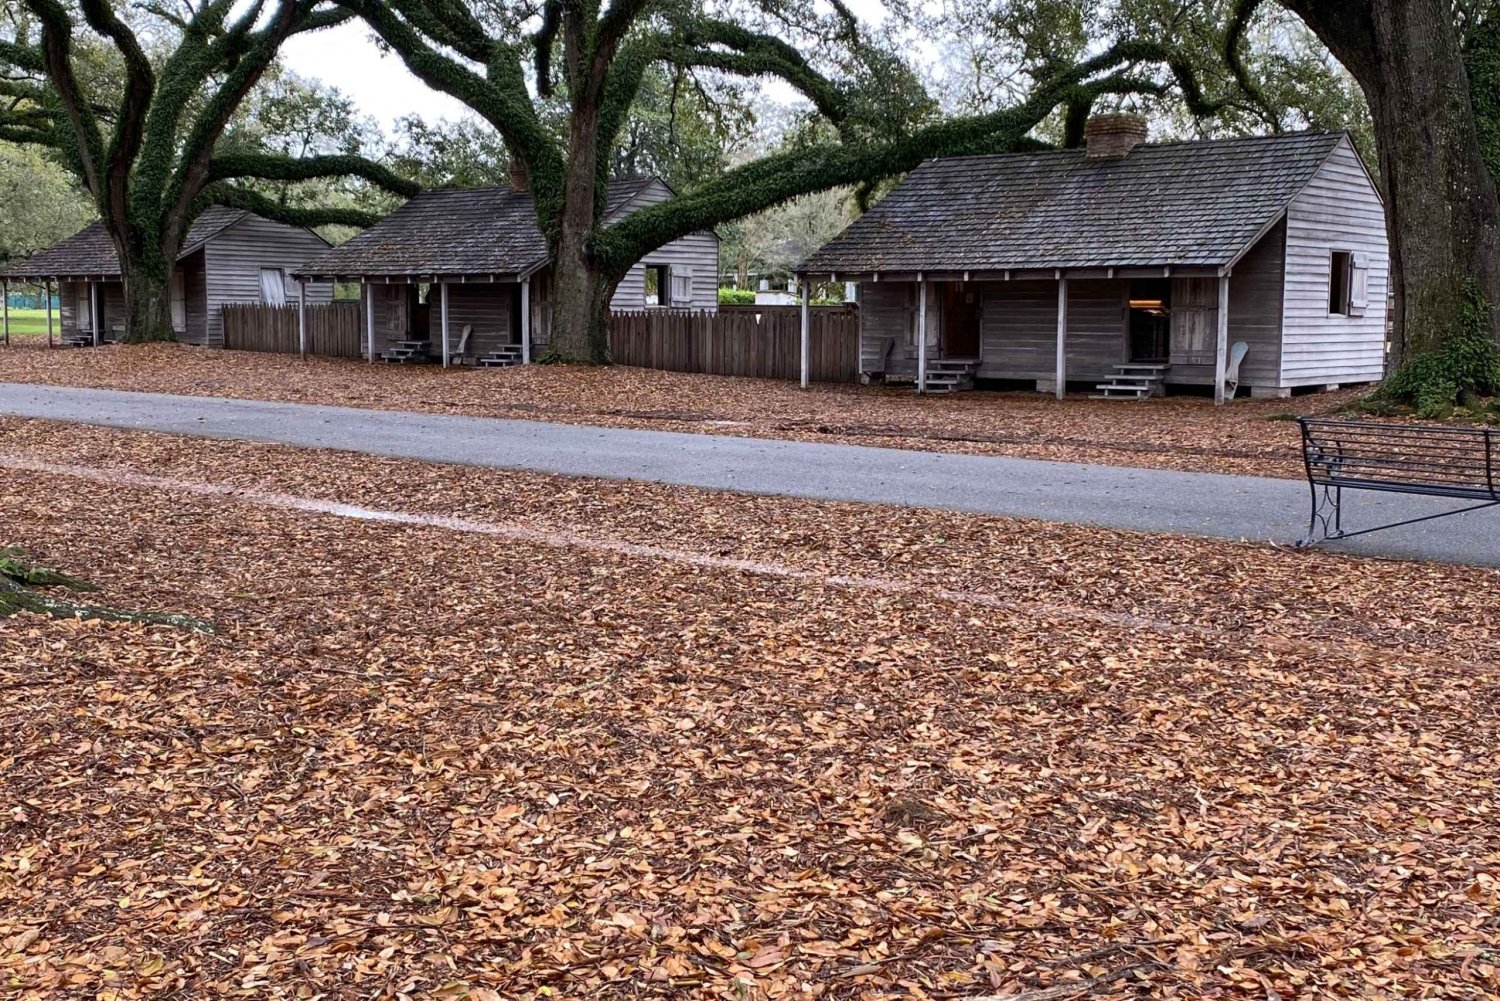 New Orleans: Oak Alley, & Laura or Whitney Plantation Tour